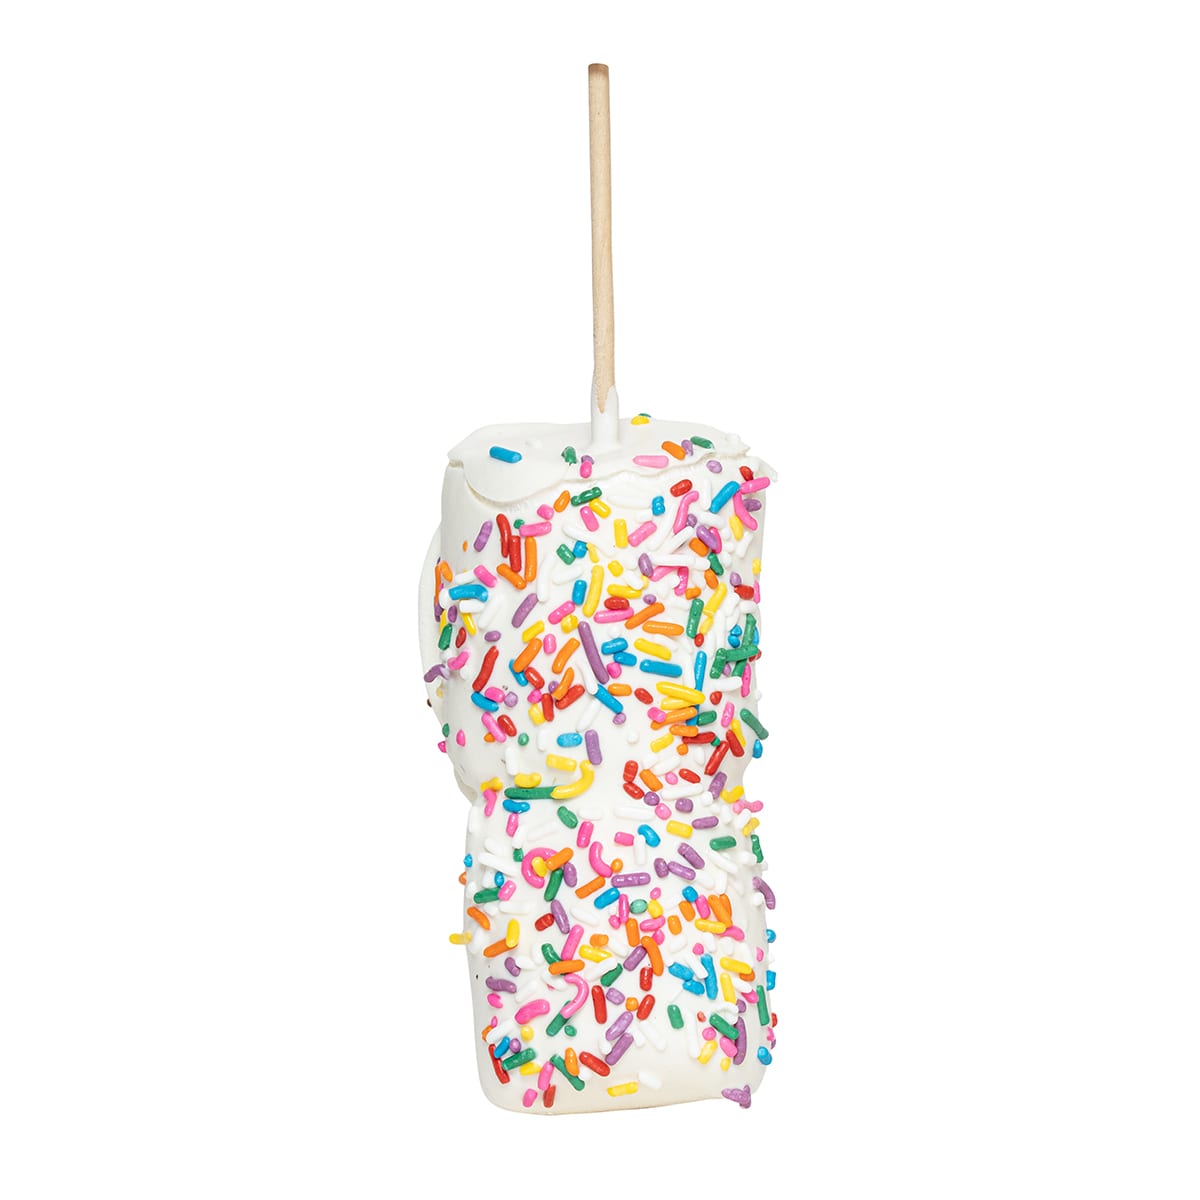 Marshmallow with Sprinkles